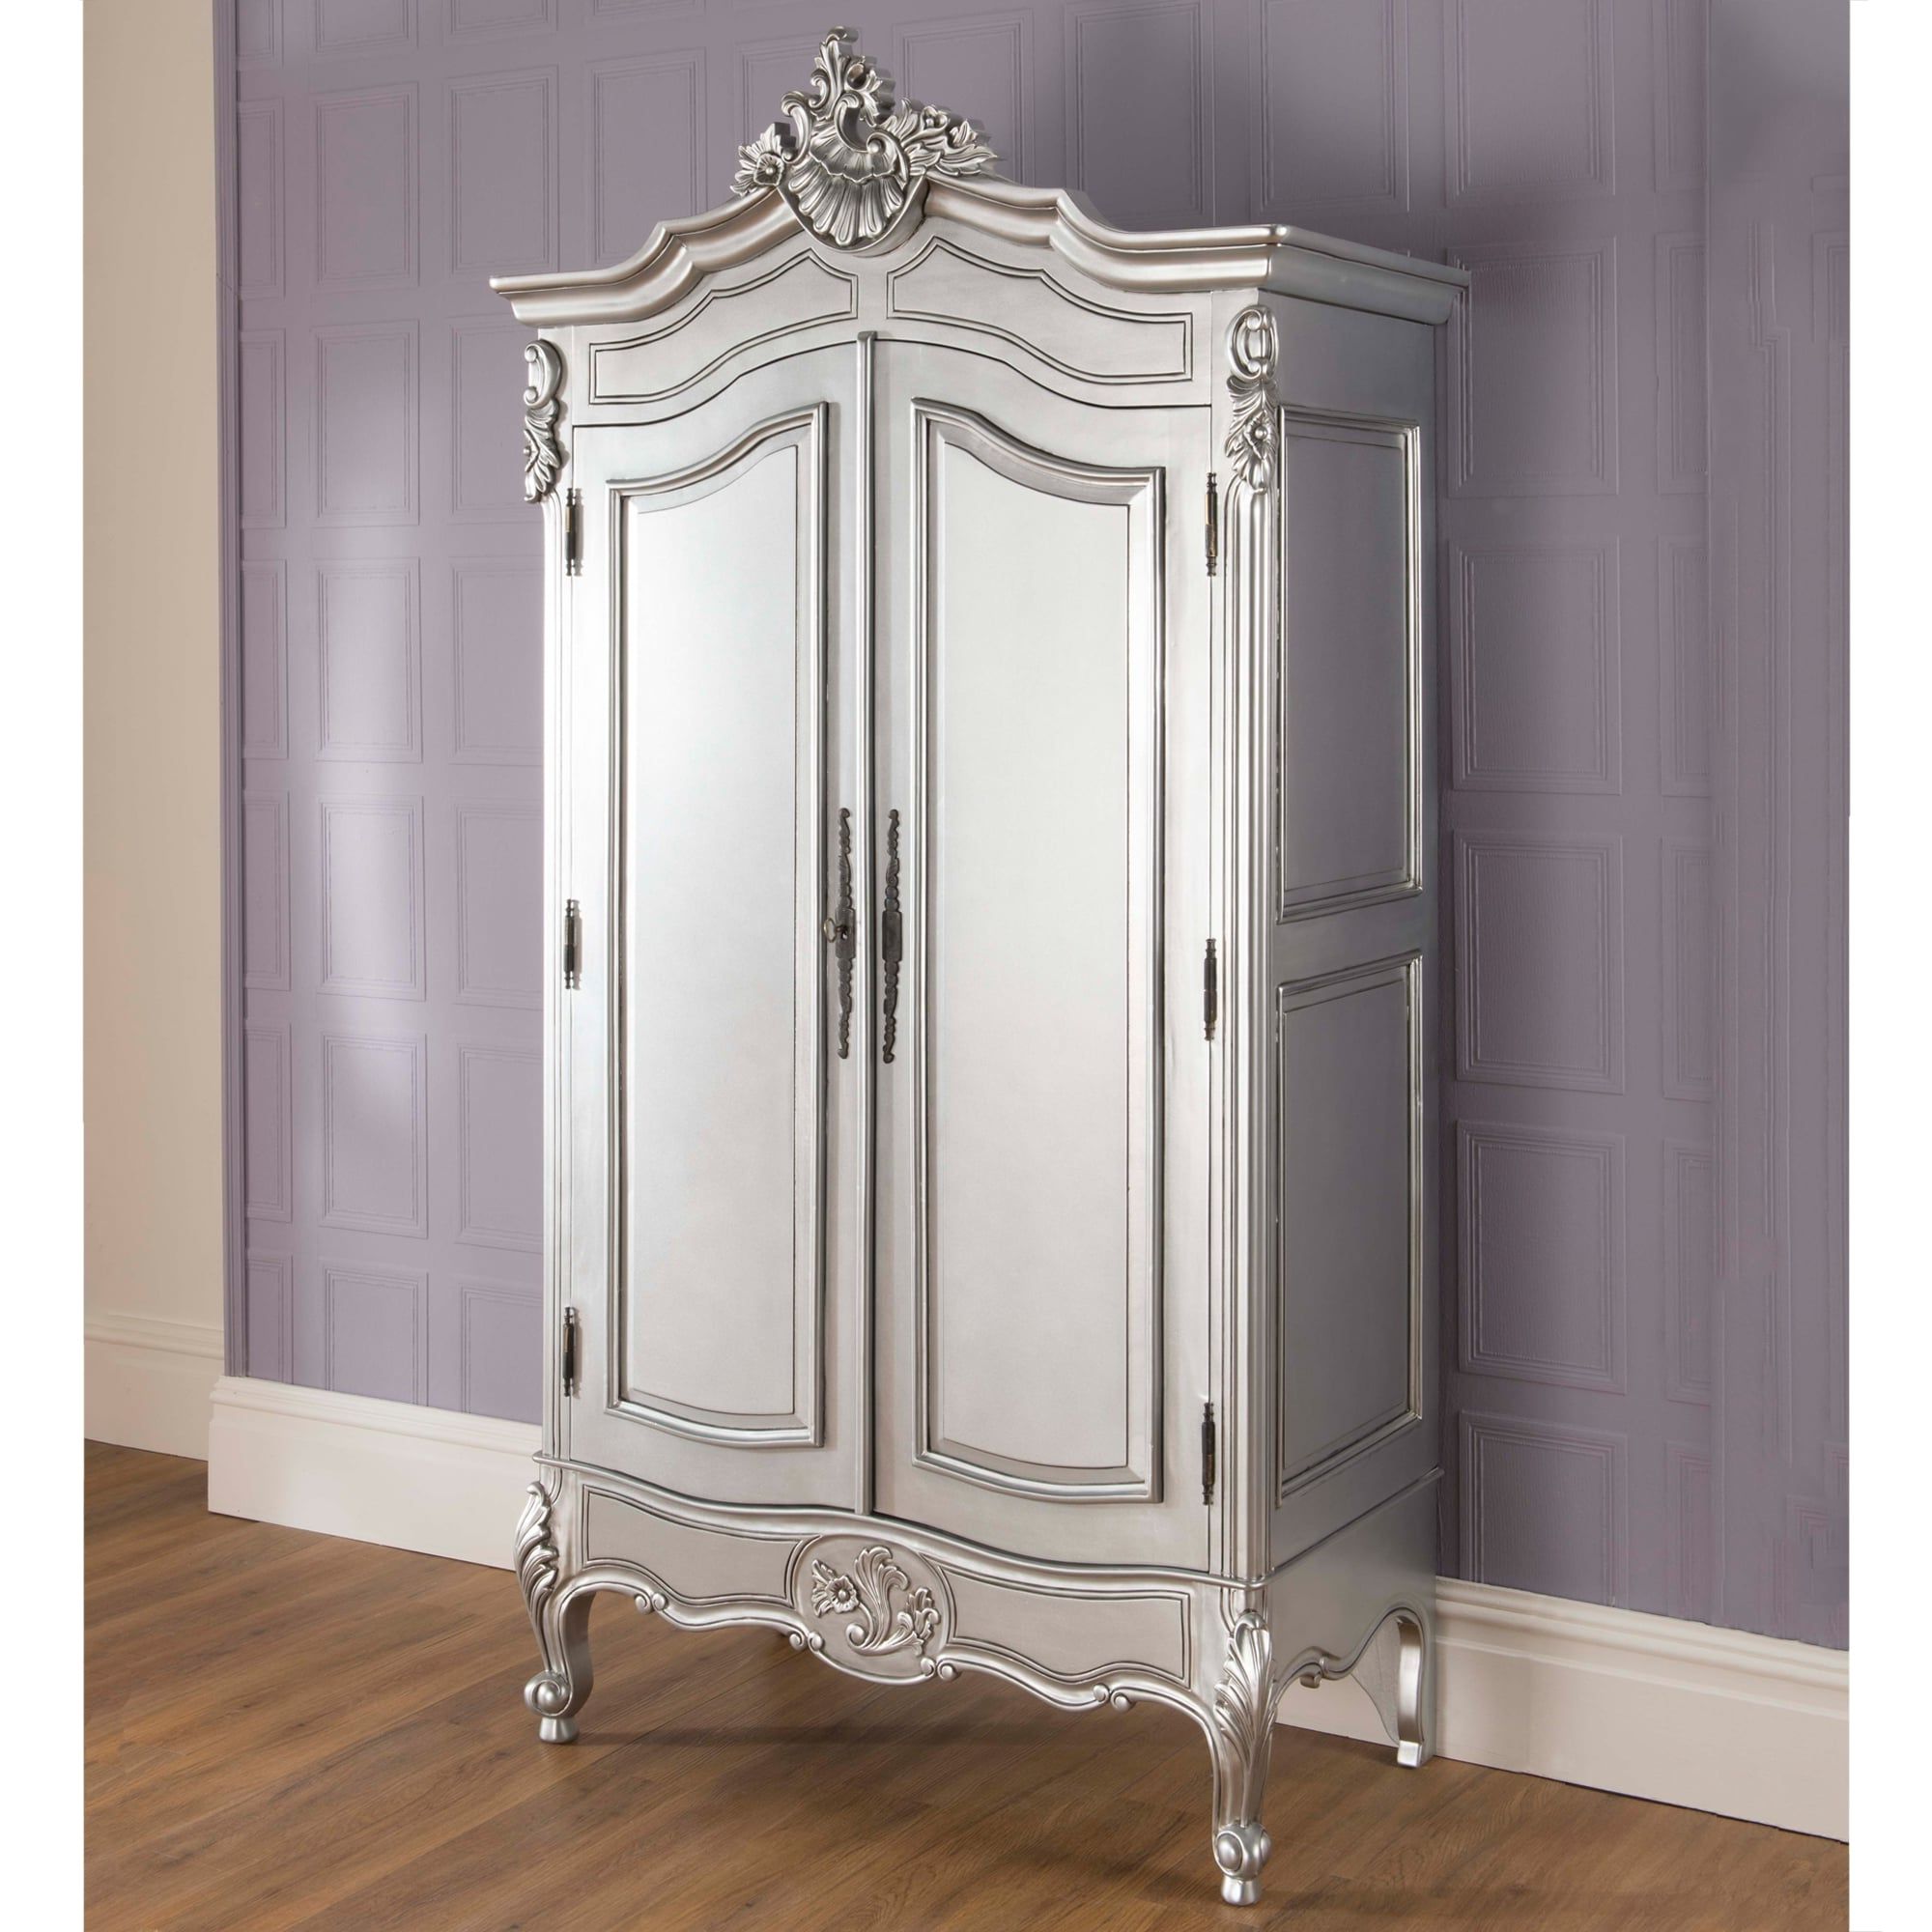 La Rochelle Antique French Wardrobe Is A Wonderful Addition To Our Shabby  Chic Furniture Pertaining To Silver French Wardrobes (View 9 of 20)